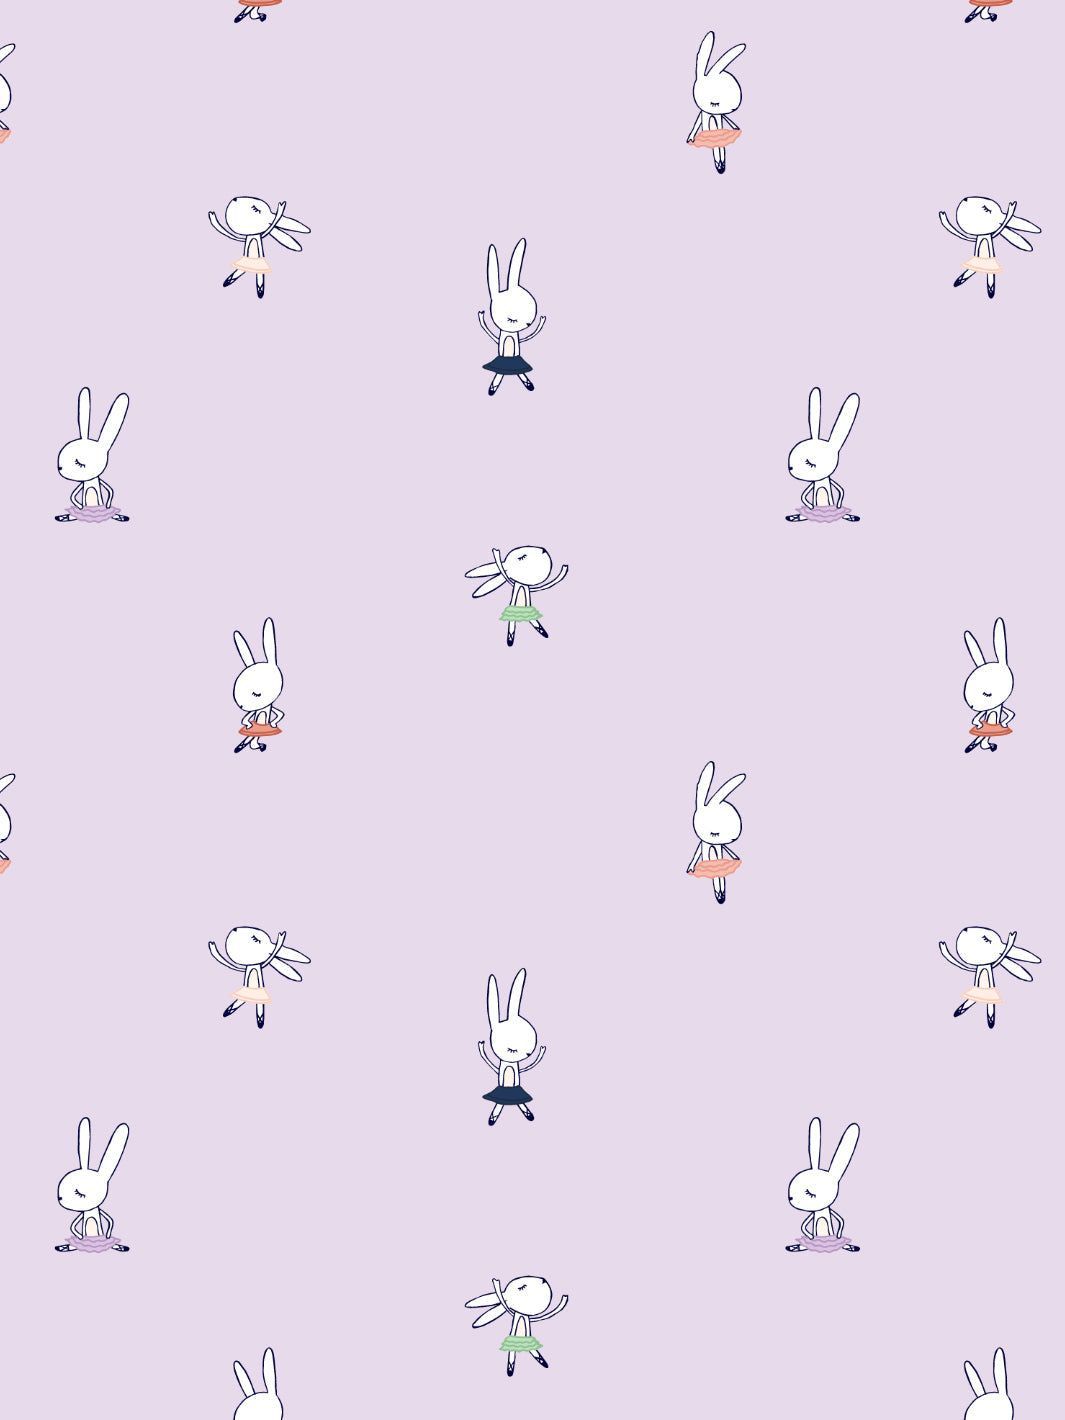 Pattern of rabbits in dresses on a light purple background - Ballet